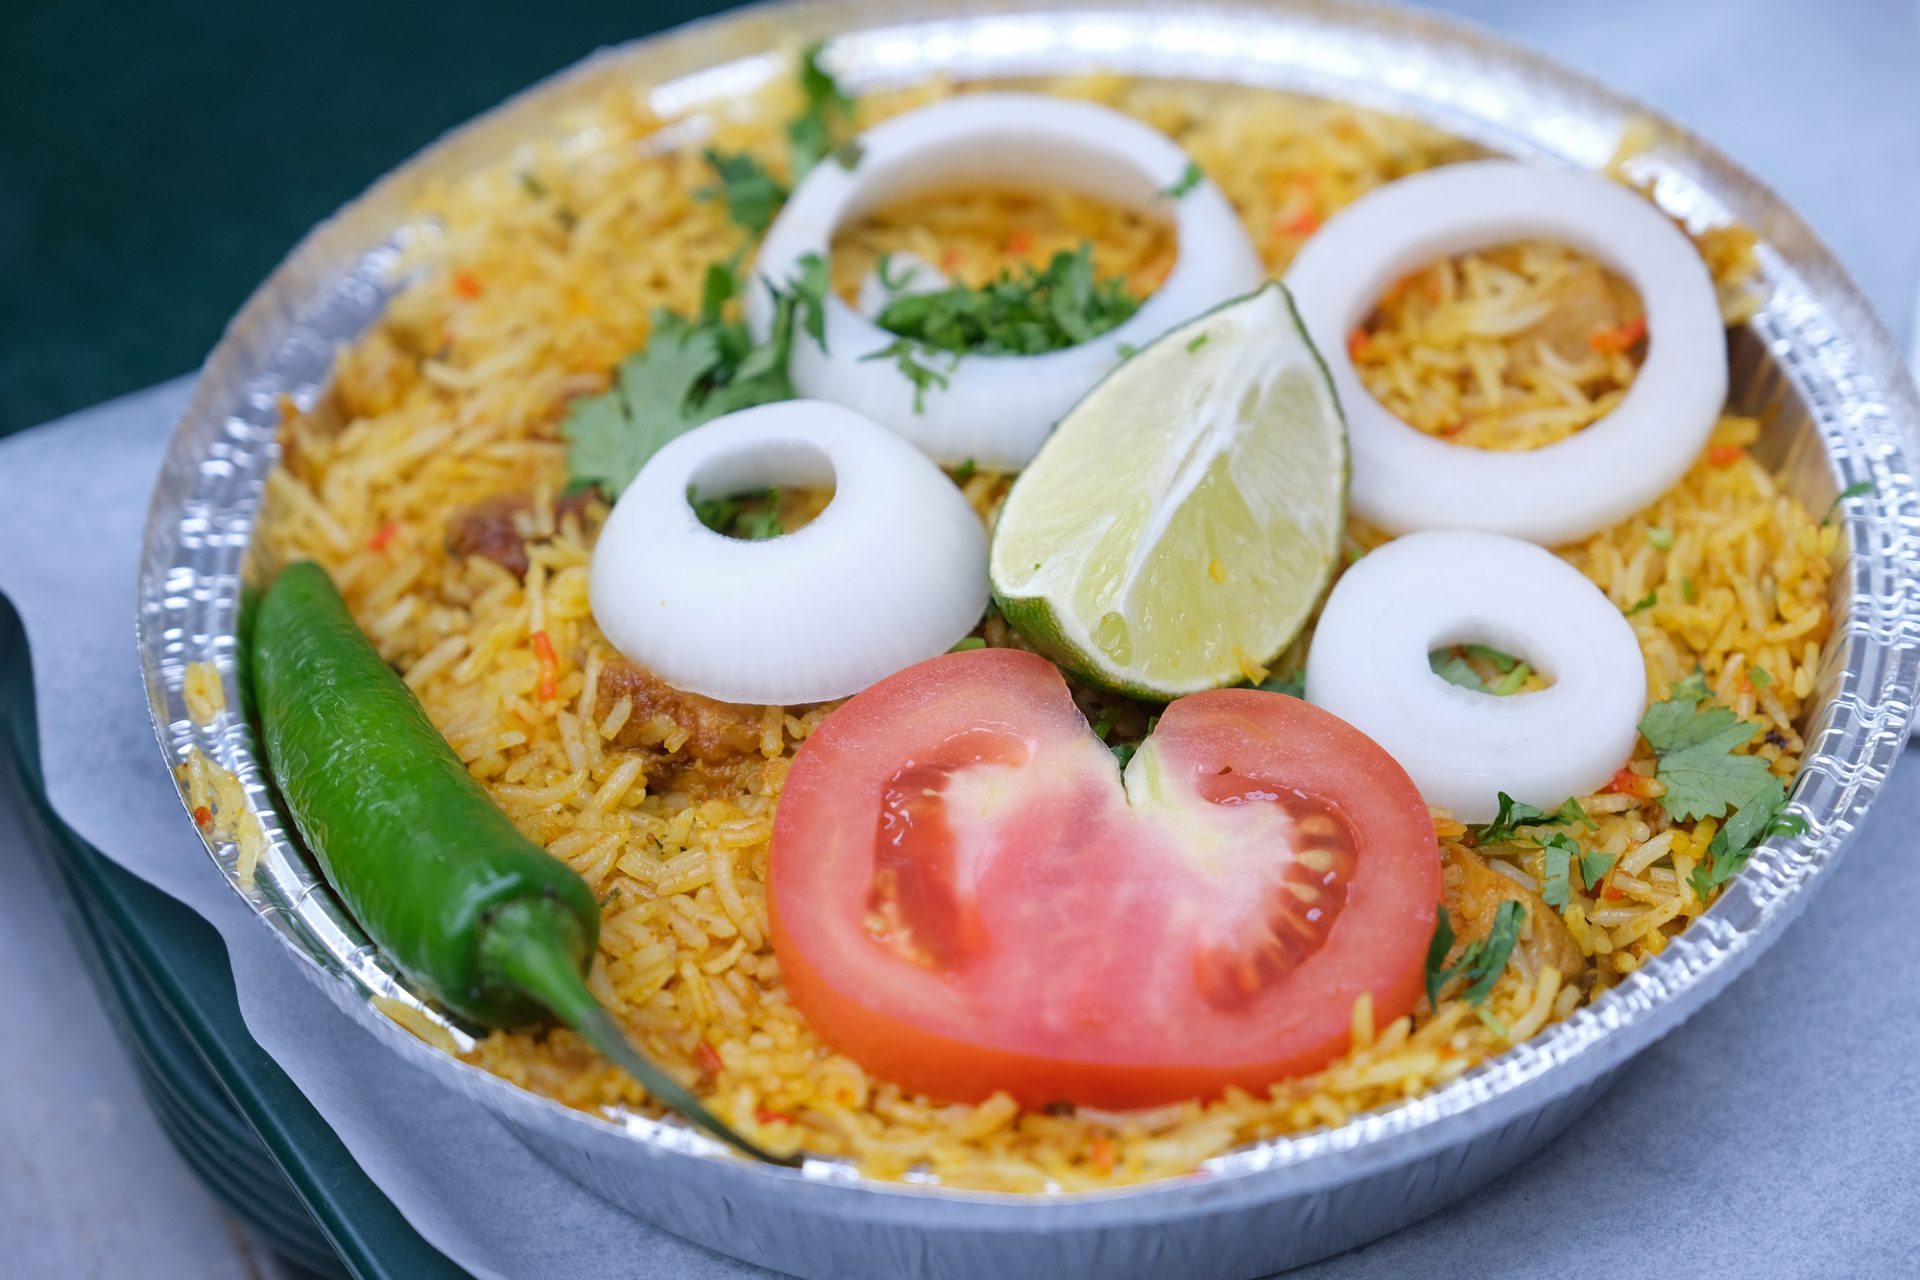 Chicken Biryani is on the menu at Eat Spice on Oct. 24, 2019, in the truck stop on route 534 off I-80 in White Haven, Pennsylvania. The restaurant caters to members of the Sikh community and as there is a large population of truckers from that community, the Indian Dhaba and Mediterranean dishes become hard to find on the road.